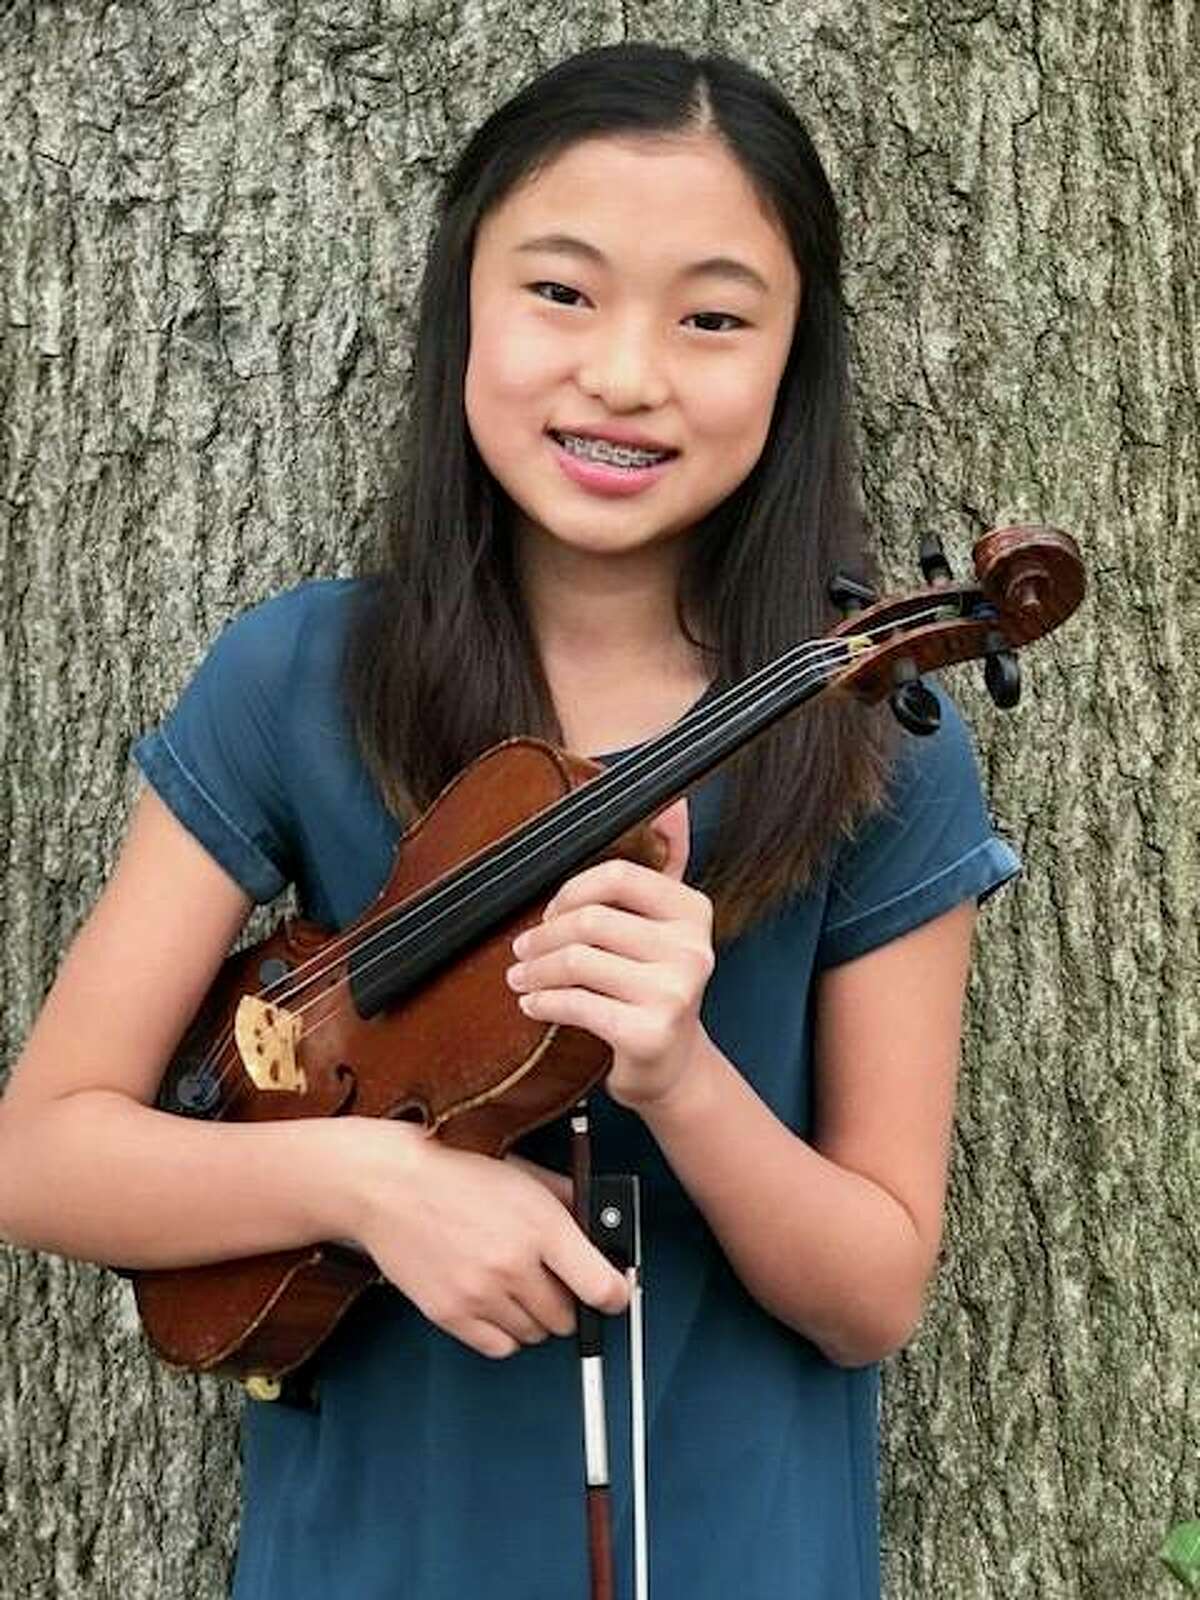 Micky Chyu, this year’s Marie Stillwell Young Artist Guild Award winner will perform at ASO’s evening “In the Nick of Time” concert.